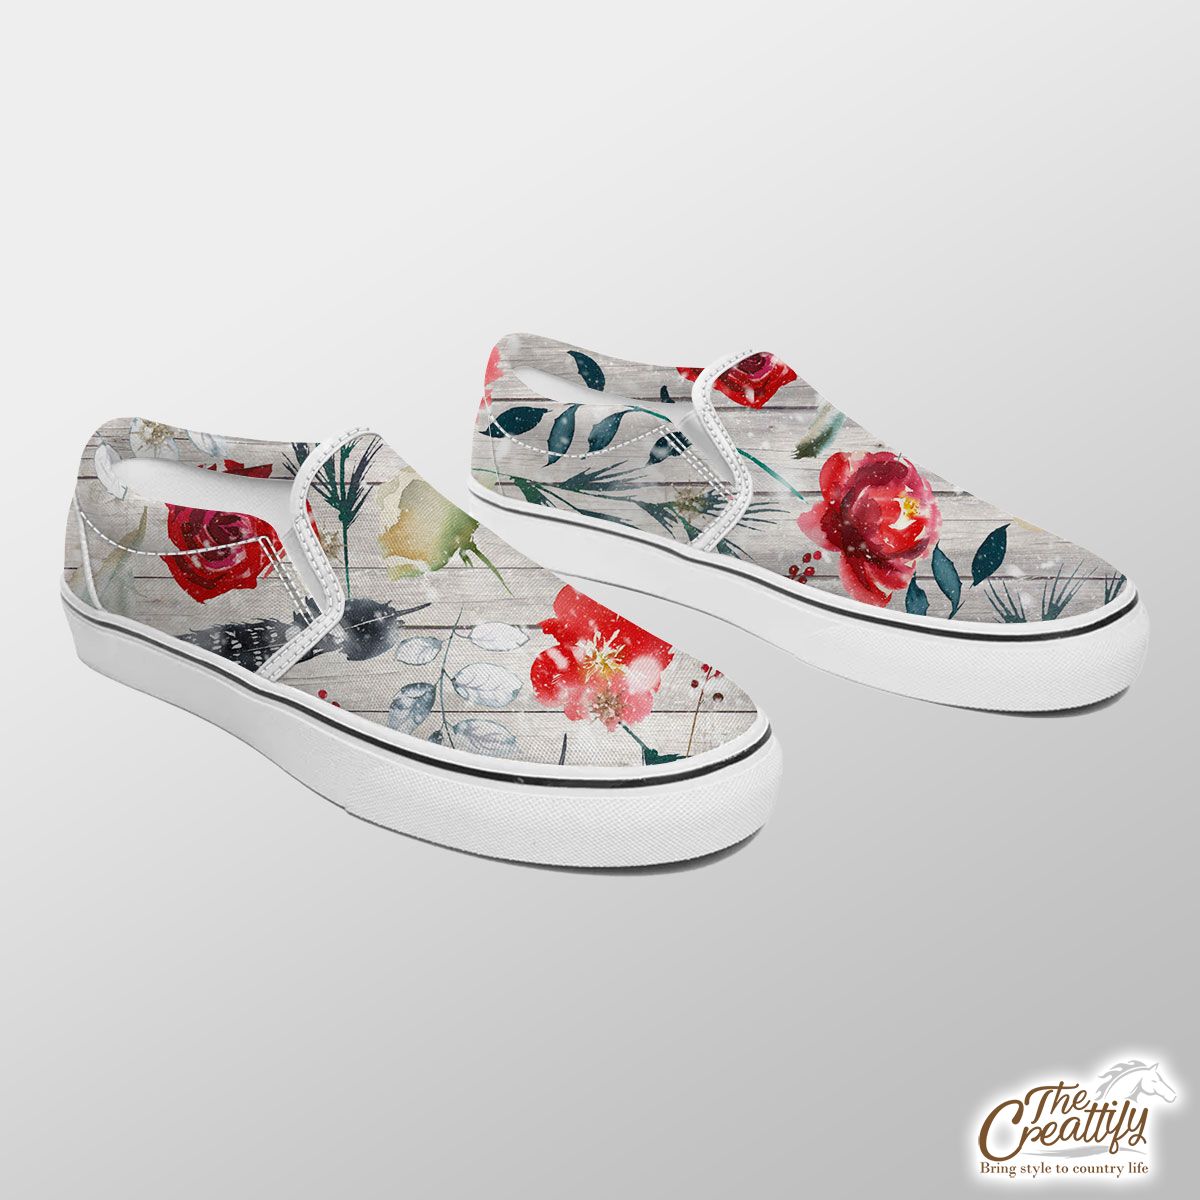 Florals With Red Berries Pattern Slip On Sneakers